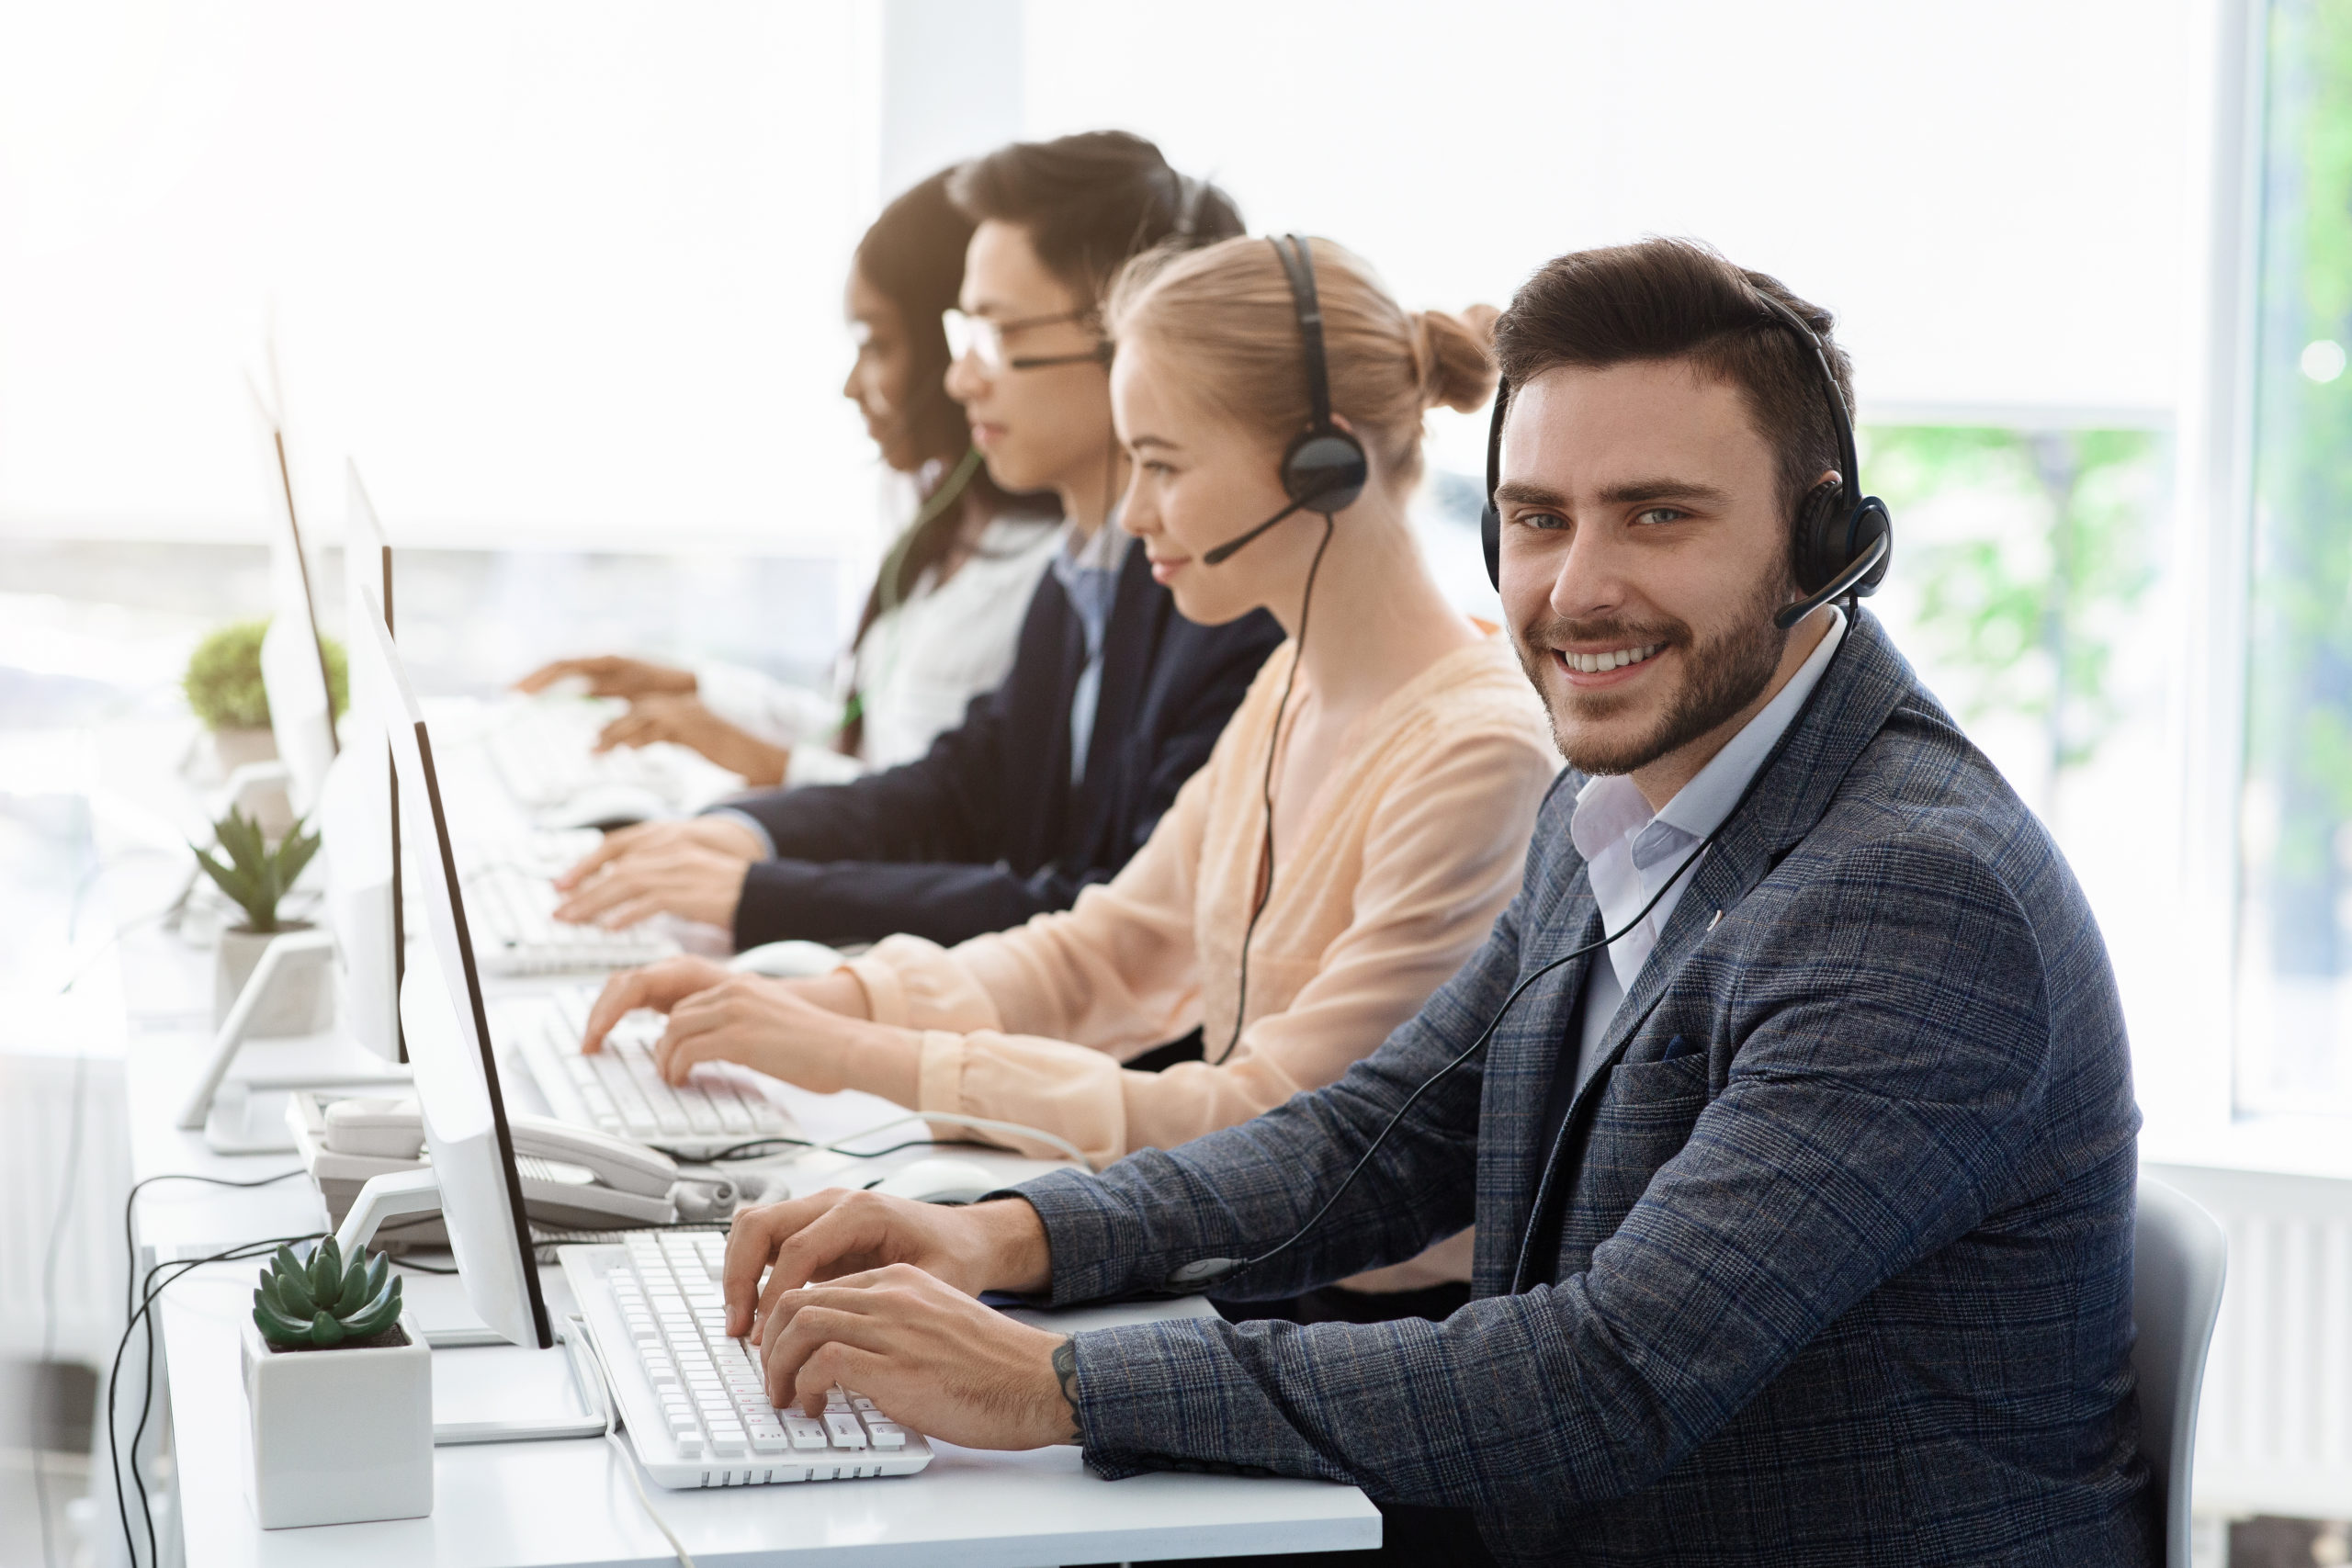 Team of customer service agents with headsets working at computers in office, copy space